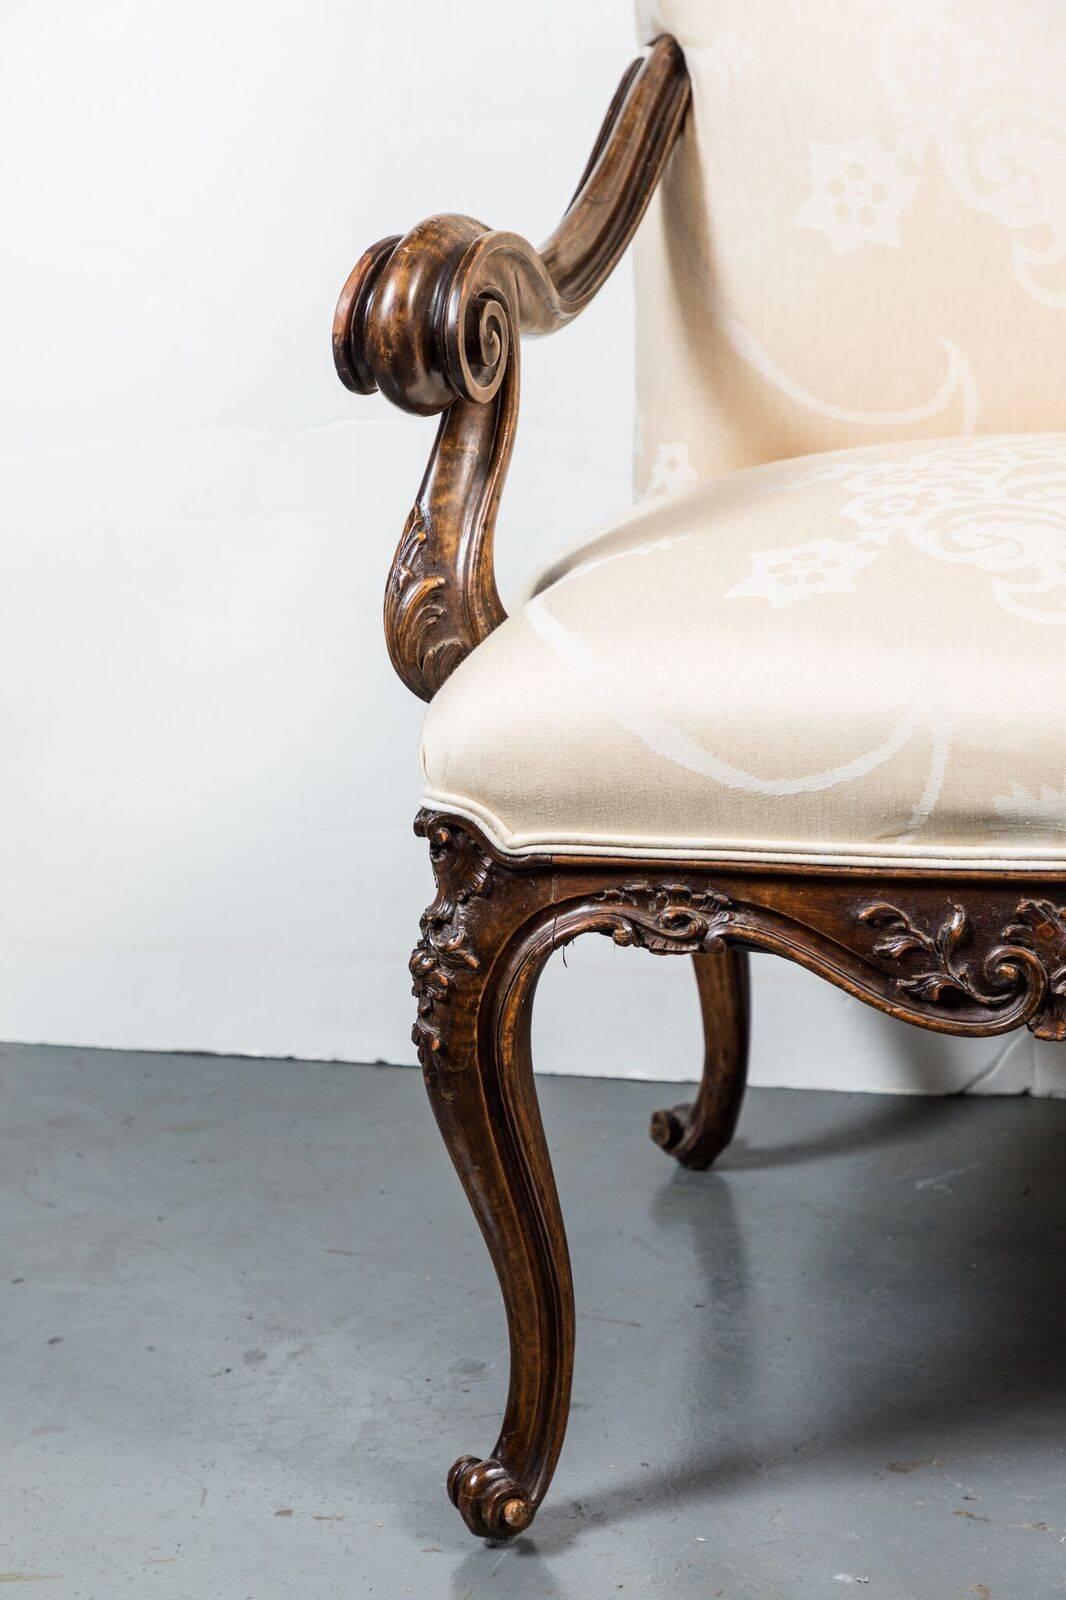 Pair of large, Italian, walnut hall chairs featuring dramatic scrolling arms above a relief carved apron with foliate details. Each chair atop delicate scrolled feet. Upholstered in a luxurious, neutral, Nancy Corzine fabric.